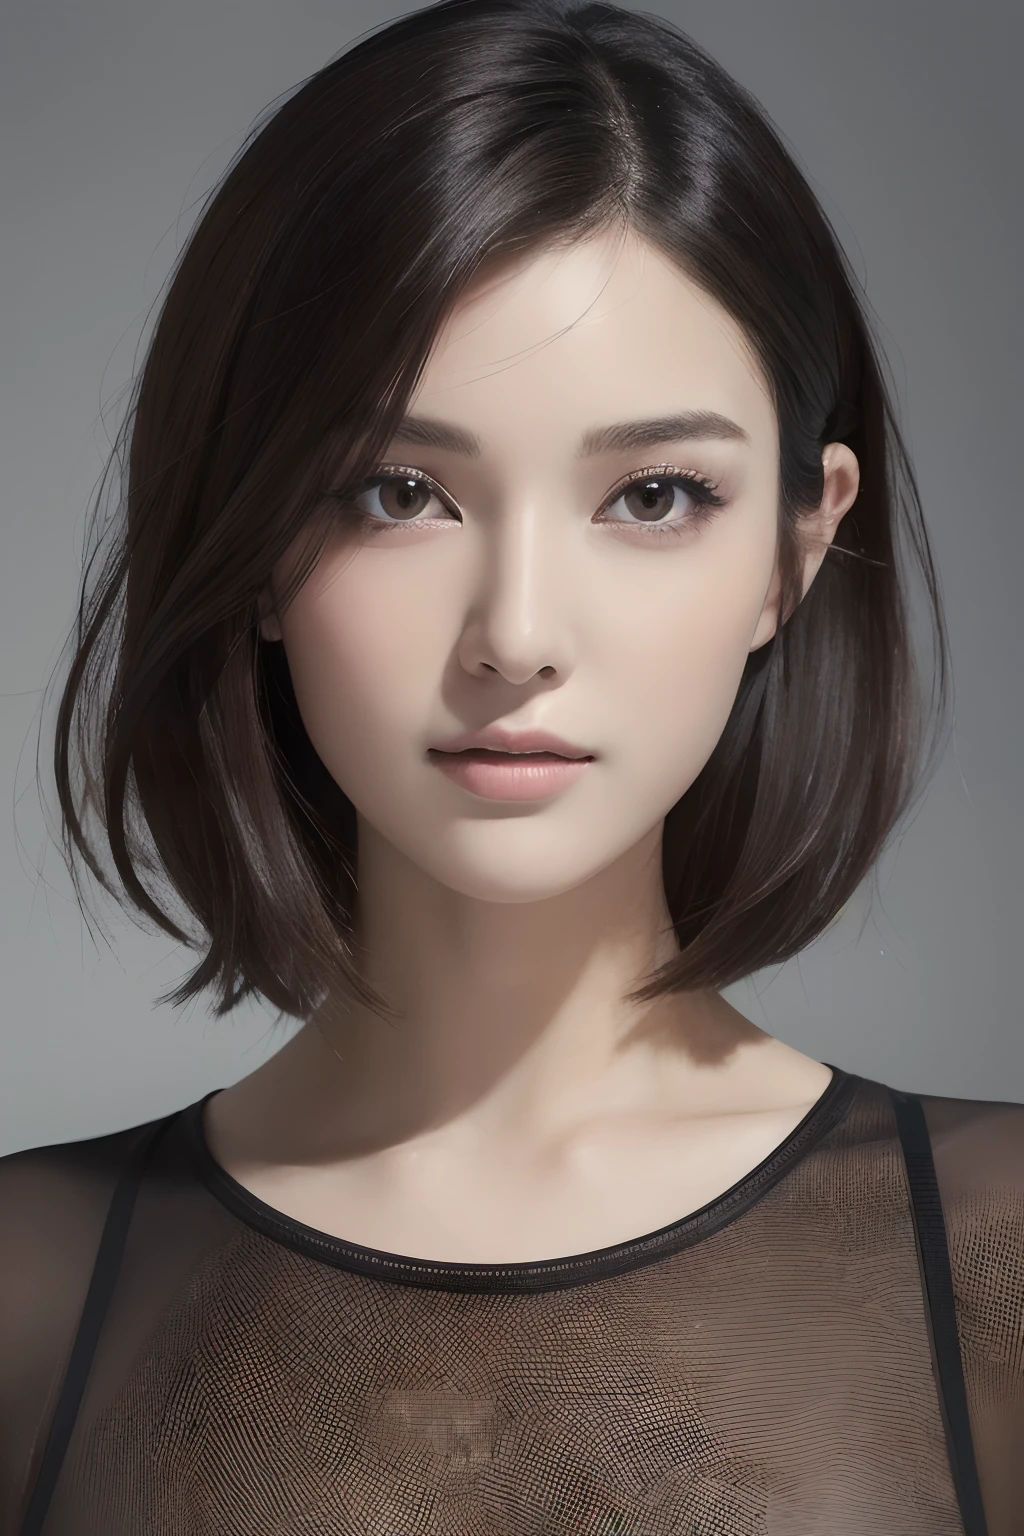 (masuter piece:1.3), (8K, Photorealsitic, Raw photography, top-quality: 1.4), (1girl in), beautiful countenance, (Lifelike face), (A dark-haired, short-hair:1.3), Beautiful hairstyle, realisticeyes, Beautiful details, real looking skin, Beautiful skins, Sweaters, absurderes, enticing, 超A high resolution, A hyper-realistic, high-detail, the golden ratio